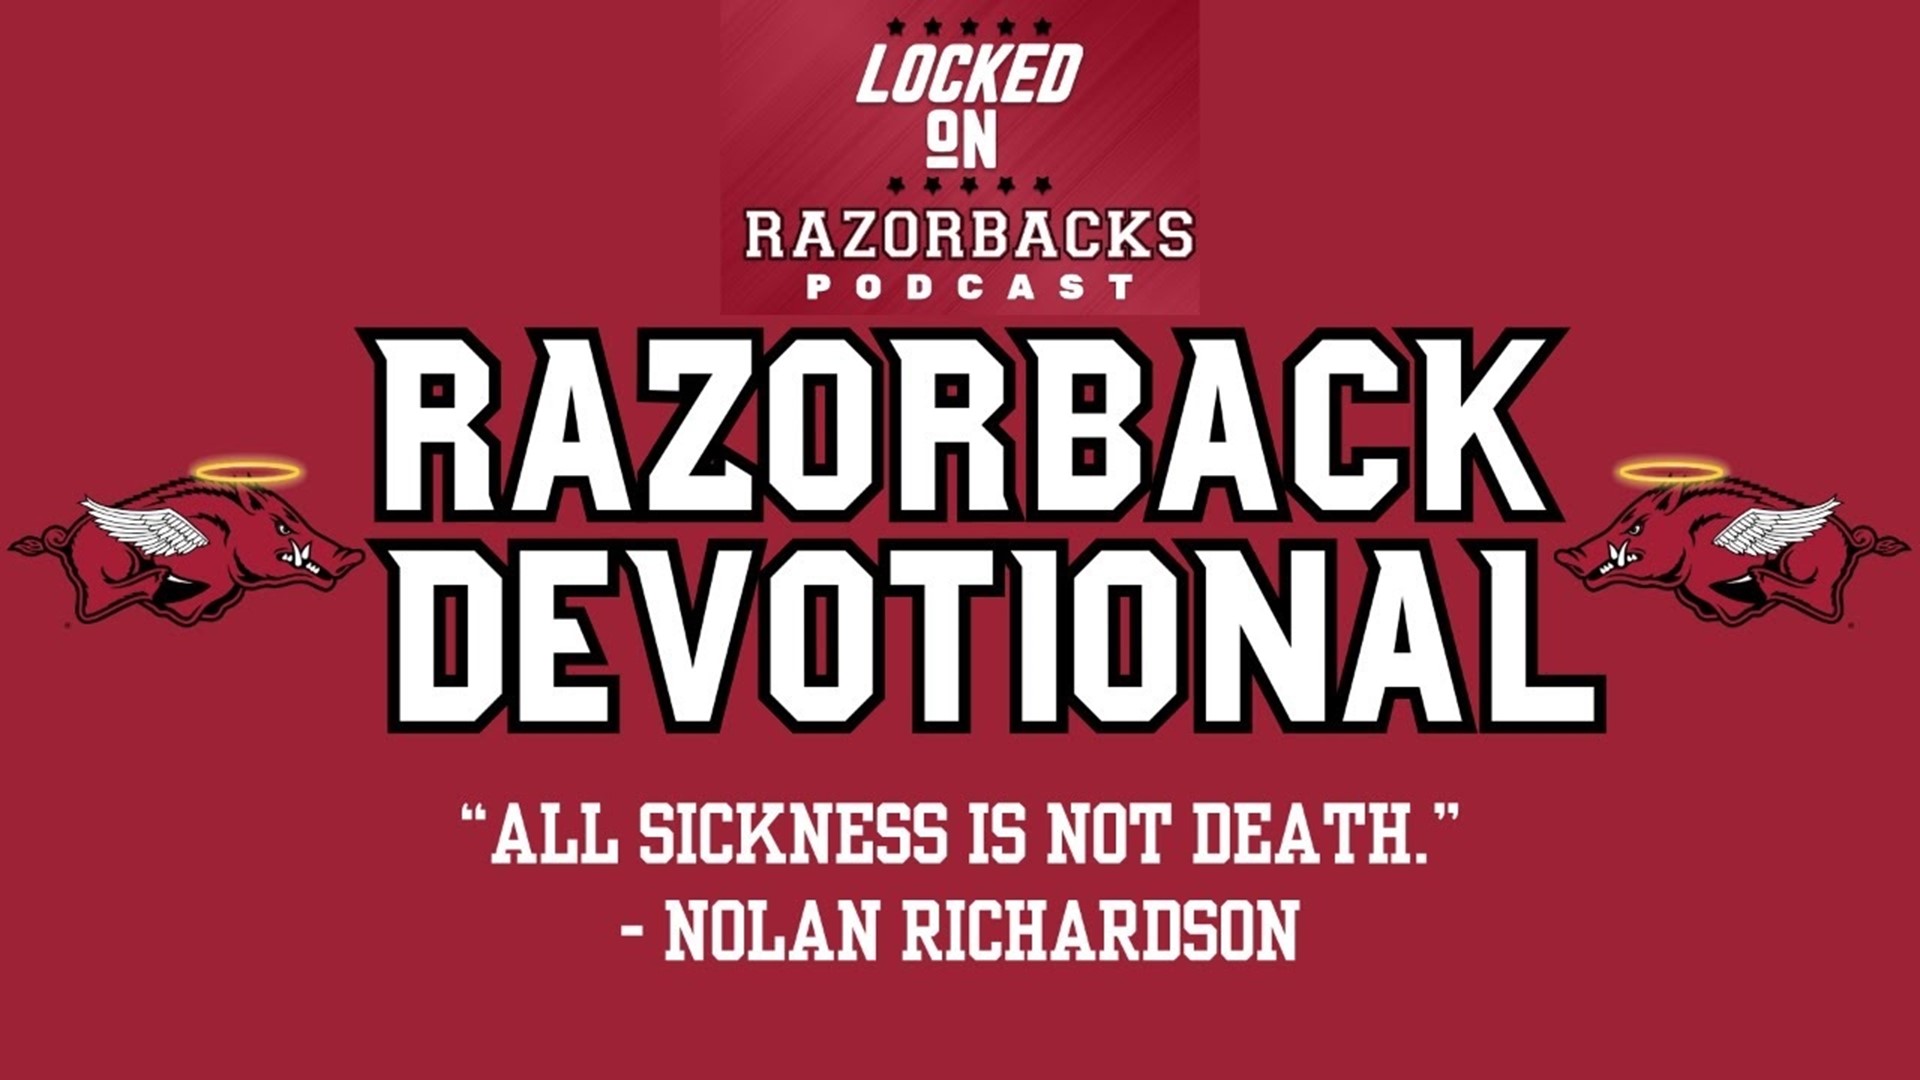 John Nabors provides a raw reaction to the Razorback's loss to BYU at home while also giving some words of encouragement to all Arkansas fans out there.